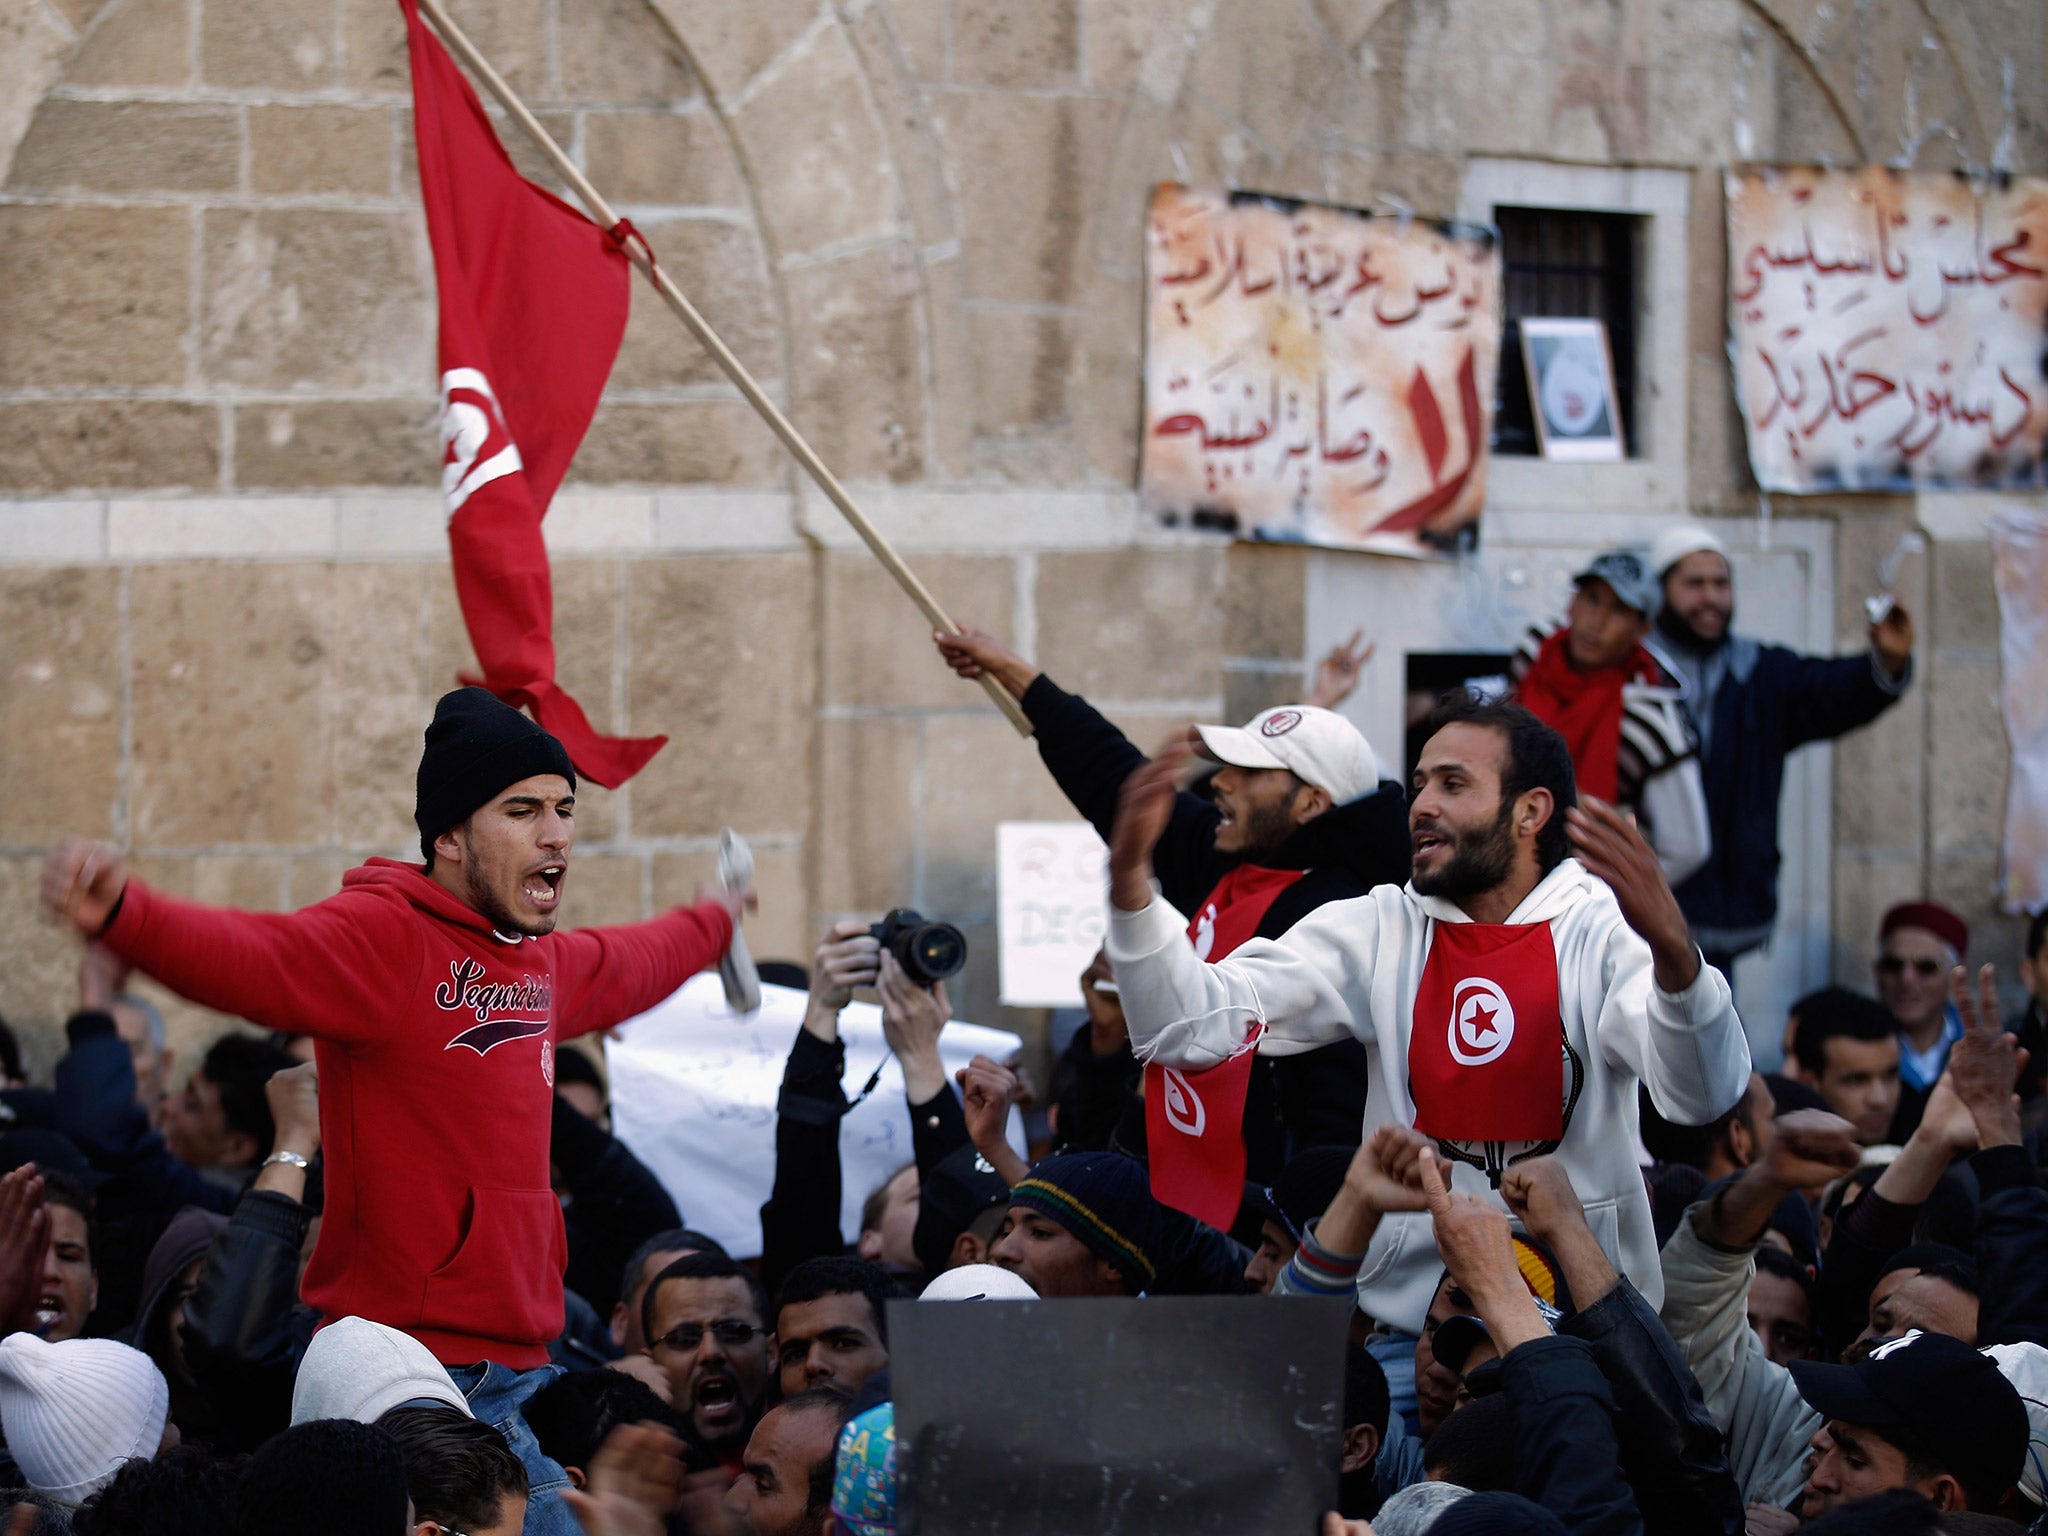 Tunisia's uprising in January 2011 drove support for protests in surrounding countries